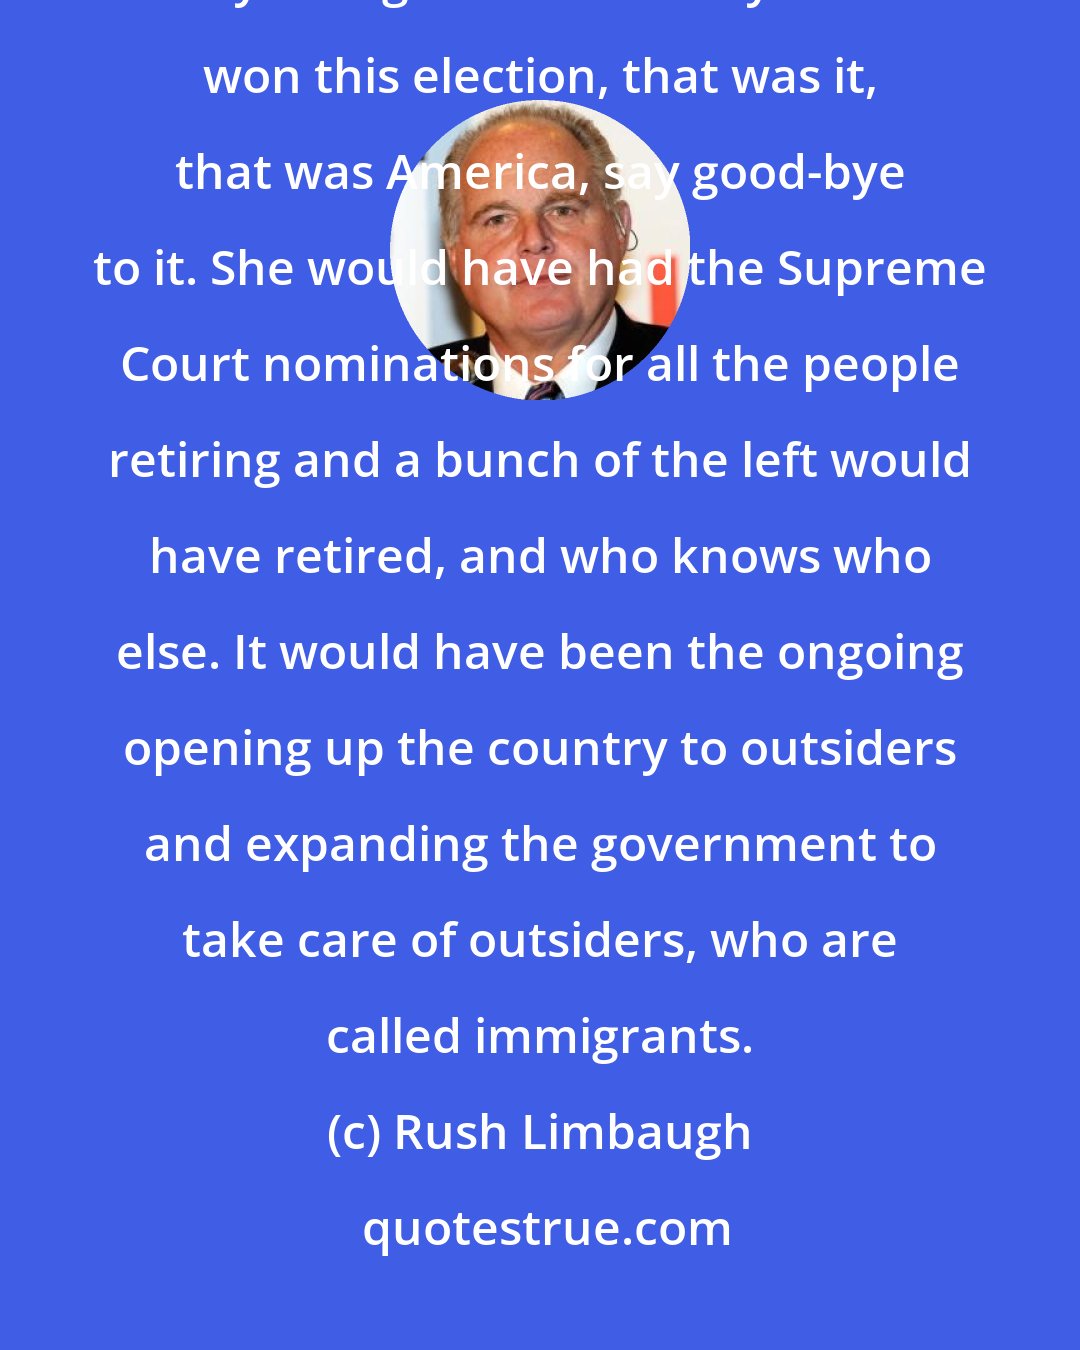 Rush Limbaugh: The people that voted for Donald Trump, the vast majority of them really thought that if Hillary Clinton won this election, that was it, that was America, say good-bye to it. She would have had the Supreme Court nominations for all the people retiring and a bunch of the left would have retired, and who knows who else. It would have been the ongoing opening up the country to outsiders and expanding the government to take care of outsiders, who are called immigrants.